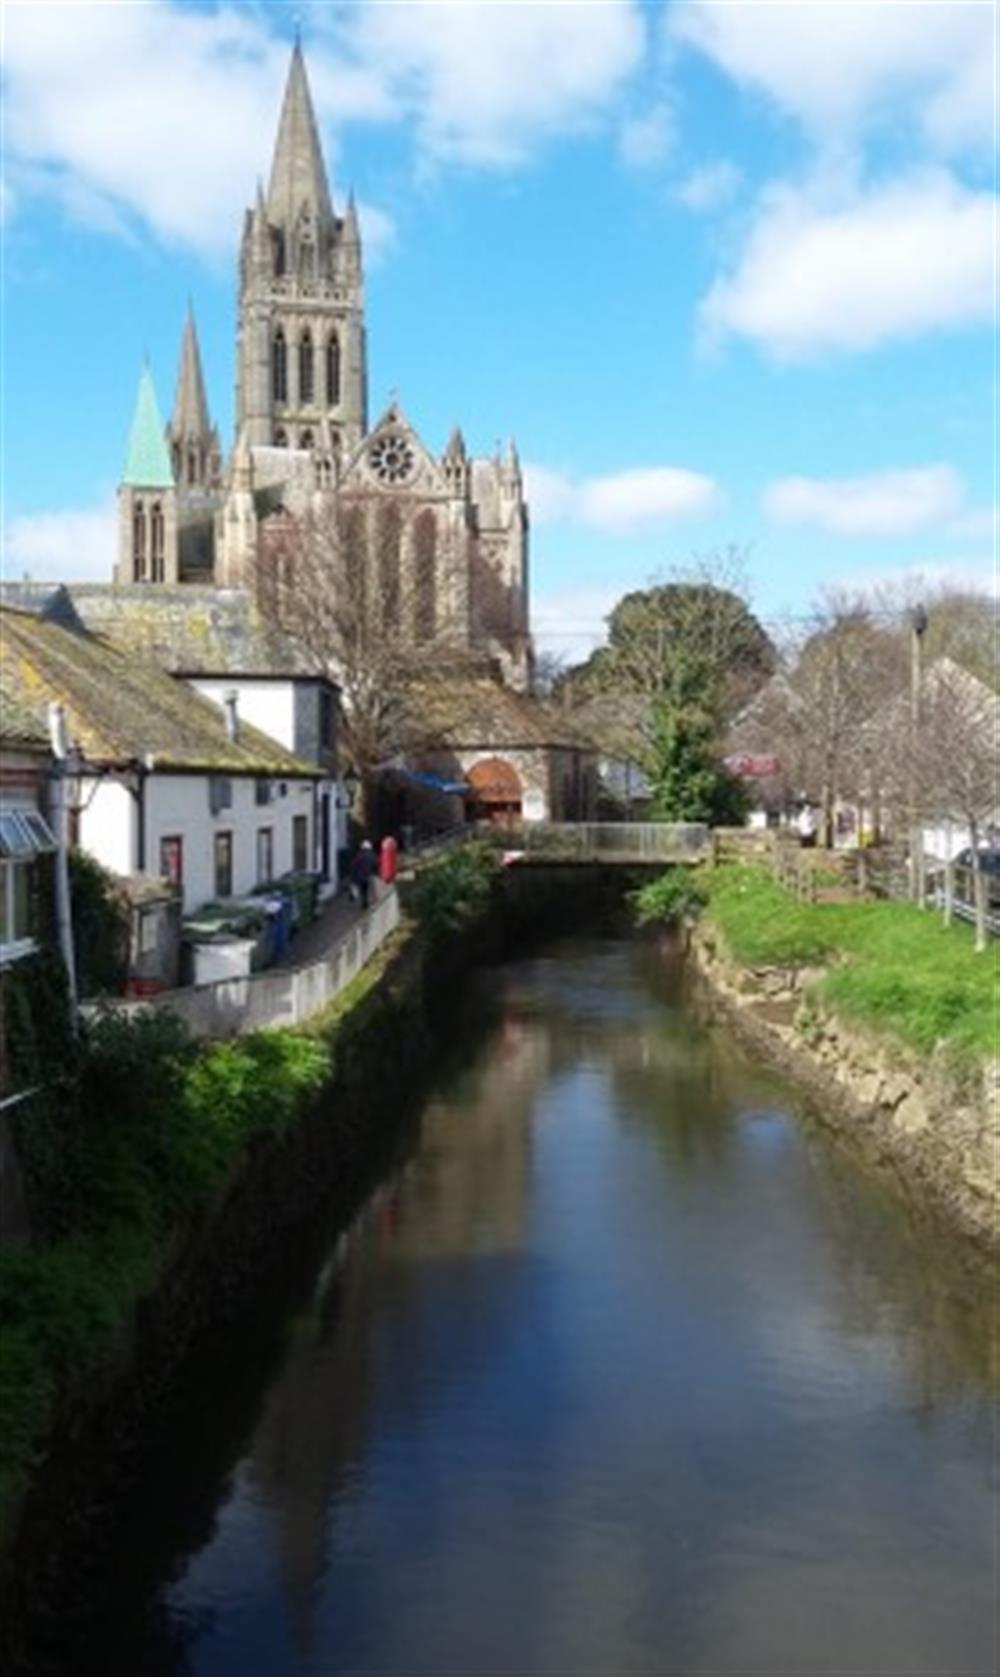 Truro is our main shopping centre. It has cafes, restaurants and a cinema too.